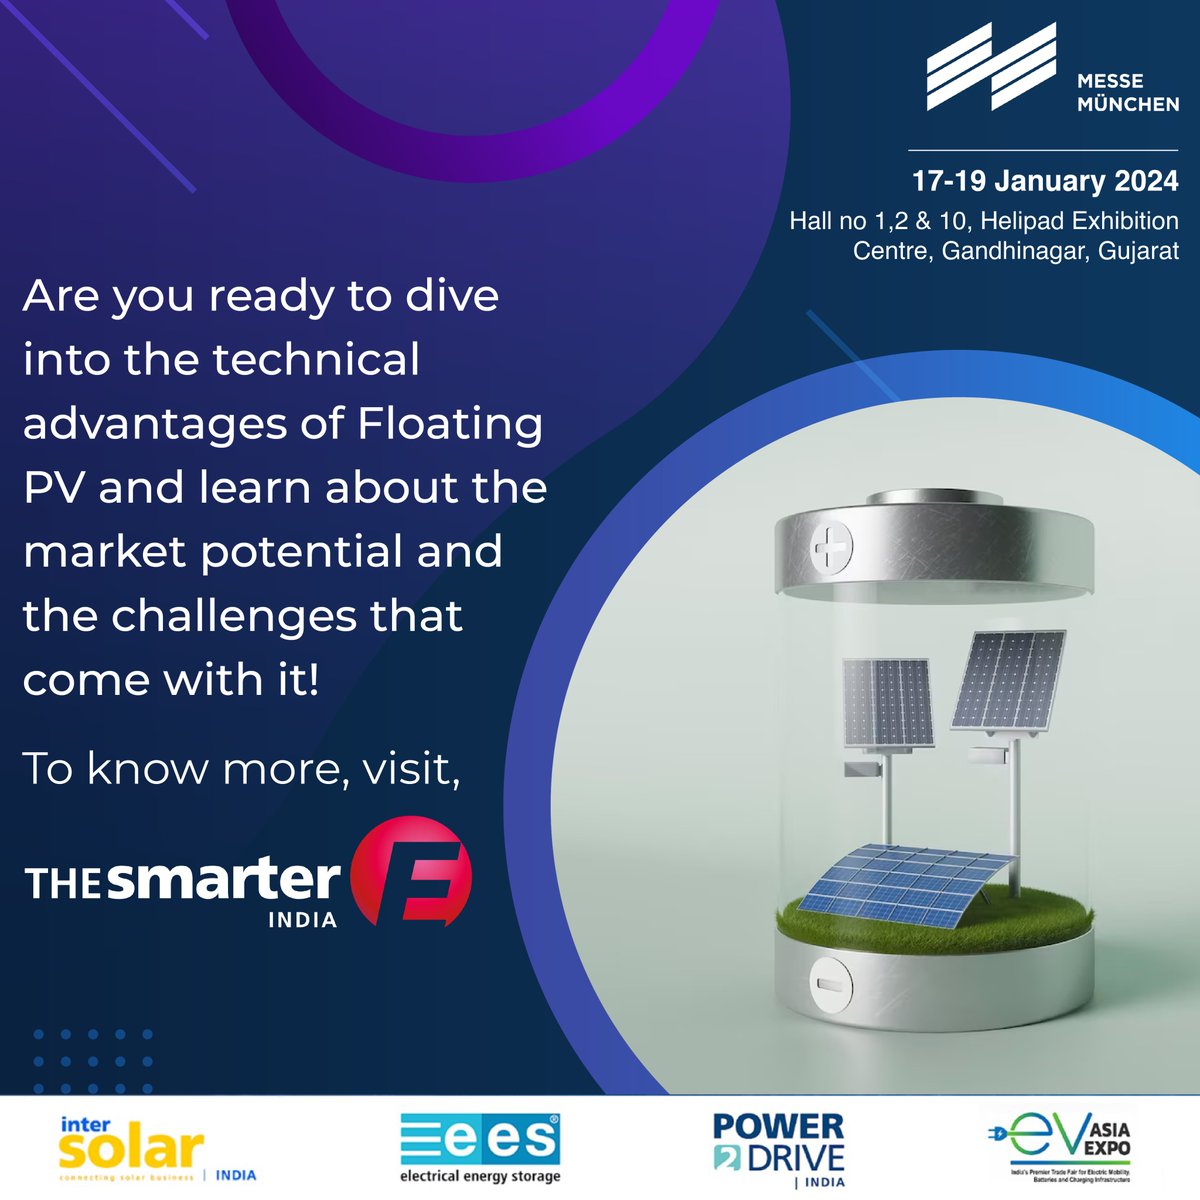 The Smarter E offers the platform to learn more about the umbrella of advantages the technology of Floating PV brings in and also about the challenges associated with it.

Date: 17th-19th Jan 2024 
Venue: Helipad Exhibition Centre, Gandhinagar, Gujarat.

#thesmarterE #solarworld